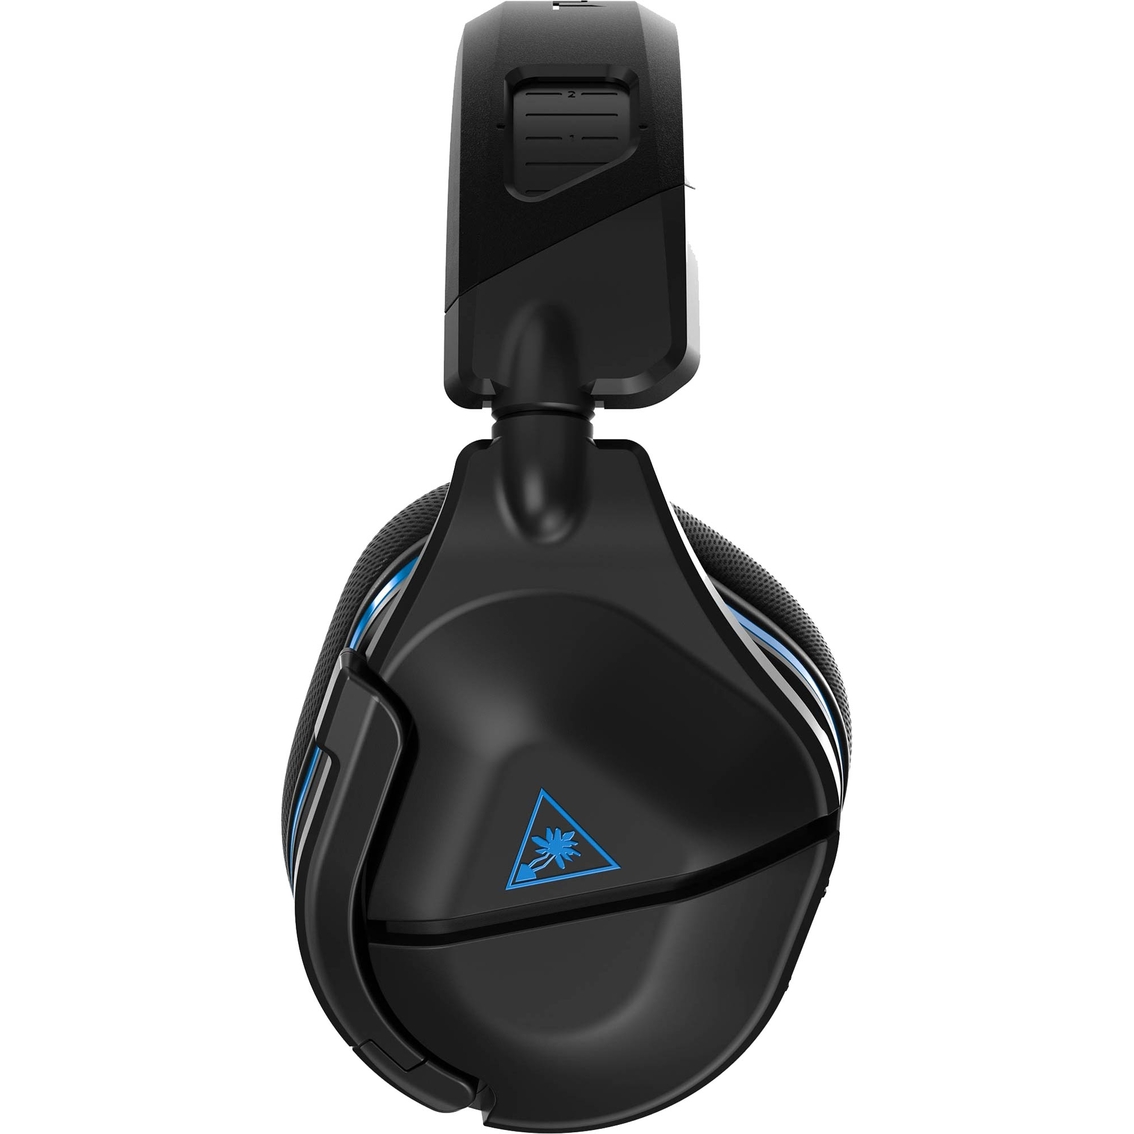 Turtle Beach Stealth 600 Gen 2 USB Wireless Amplified Gaming Headset - Image 4 of 7